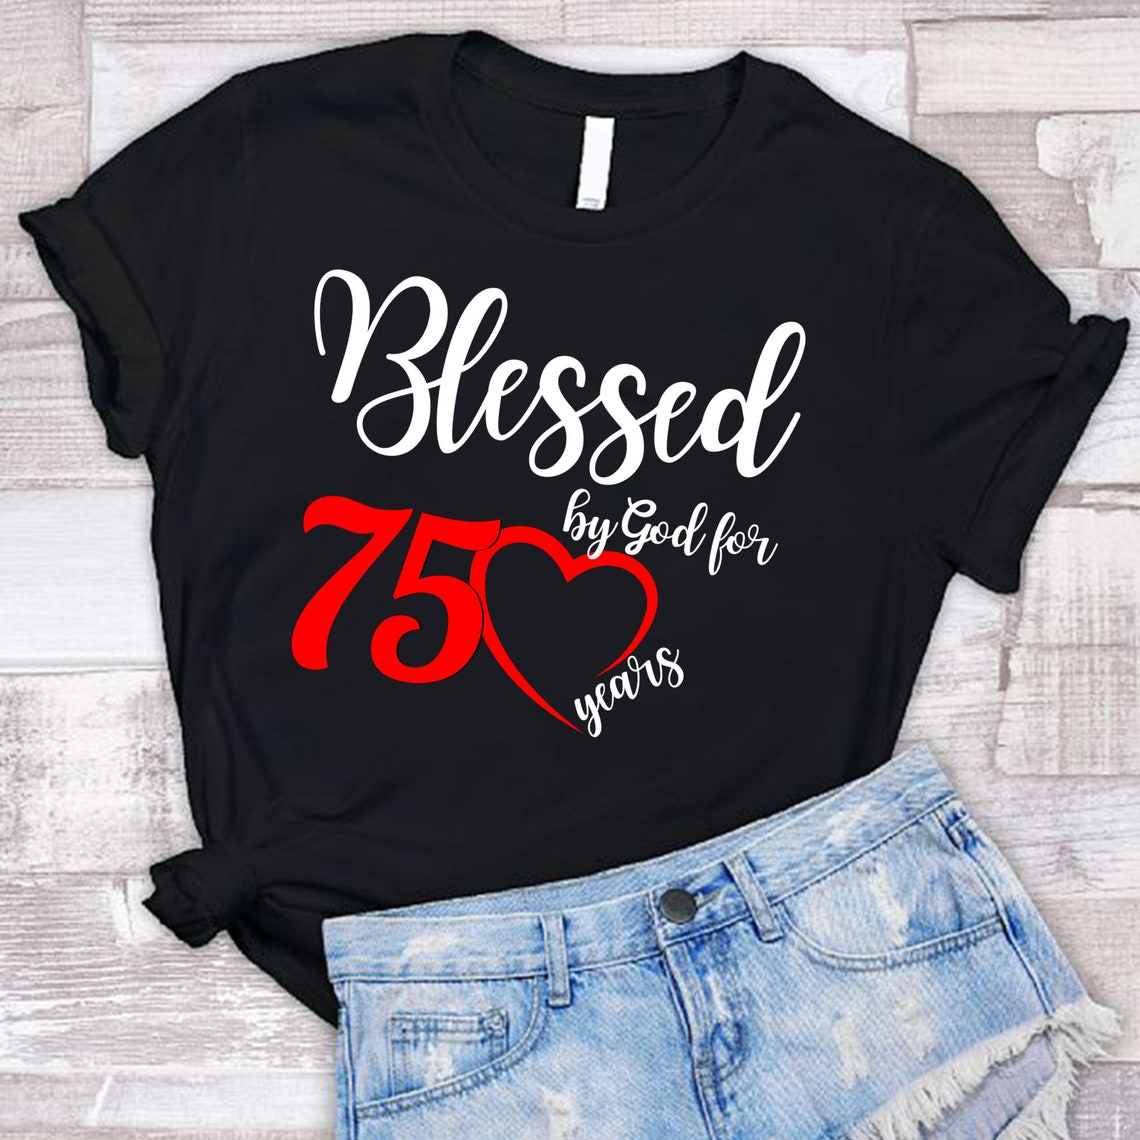 Blessed By God For 75 Years T-Shirt